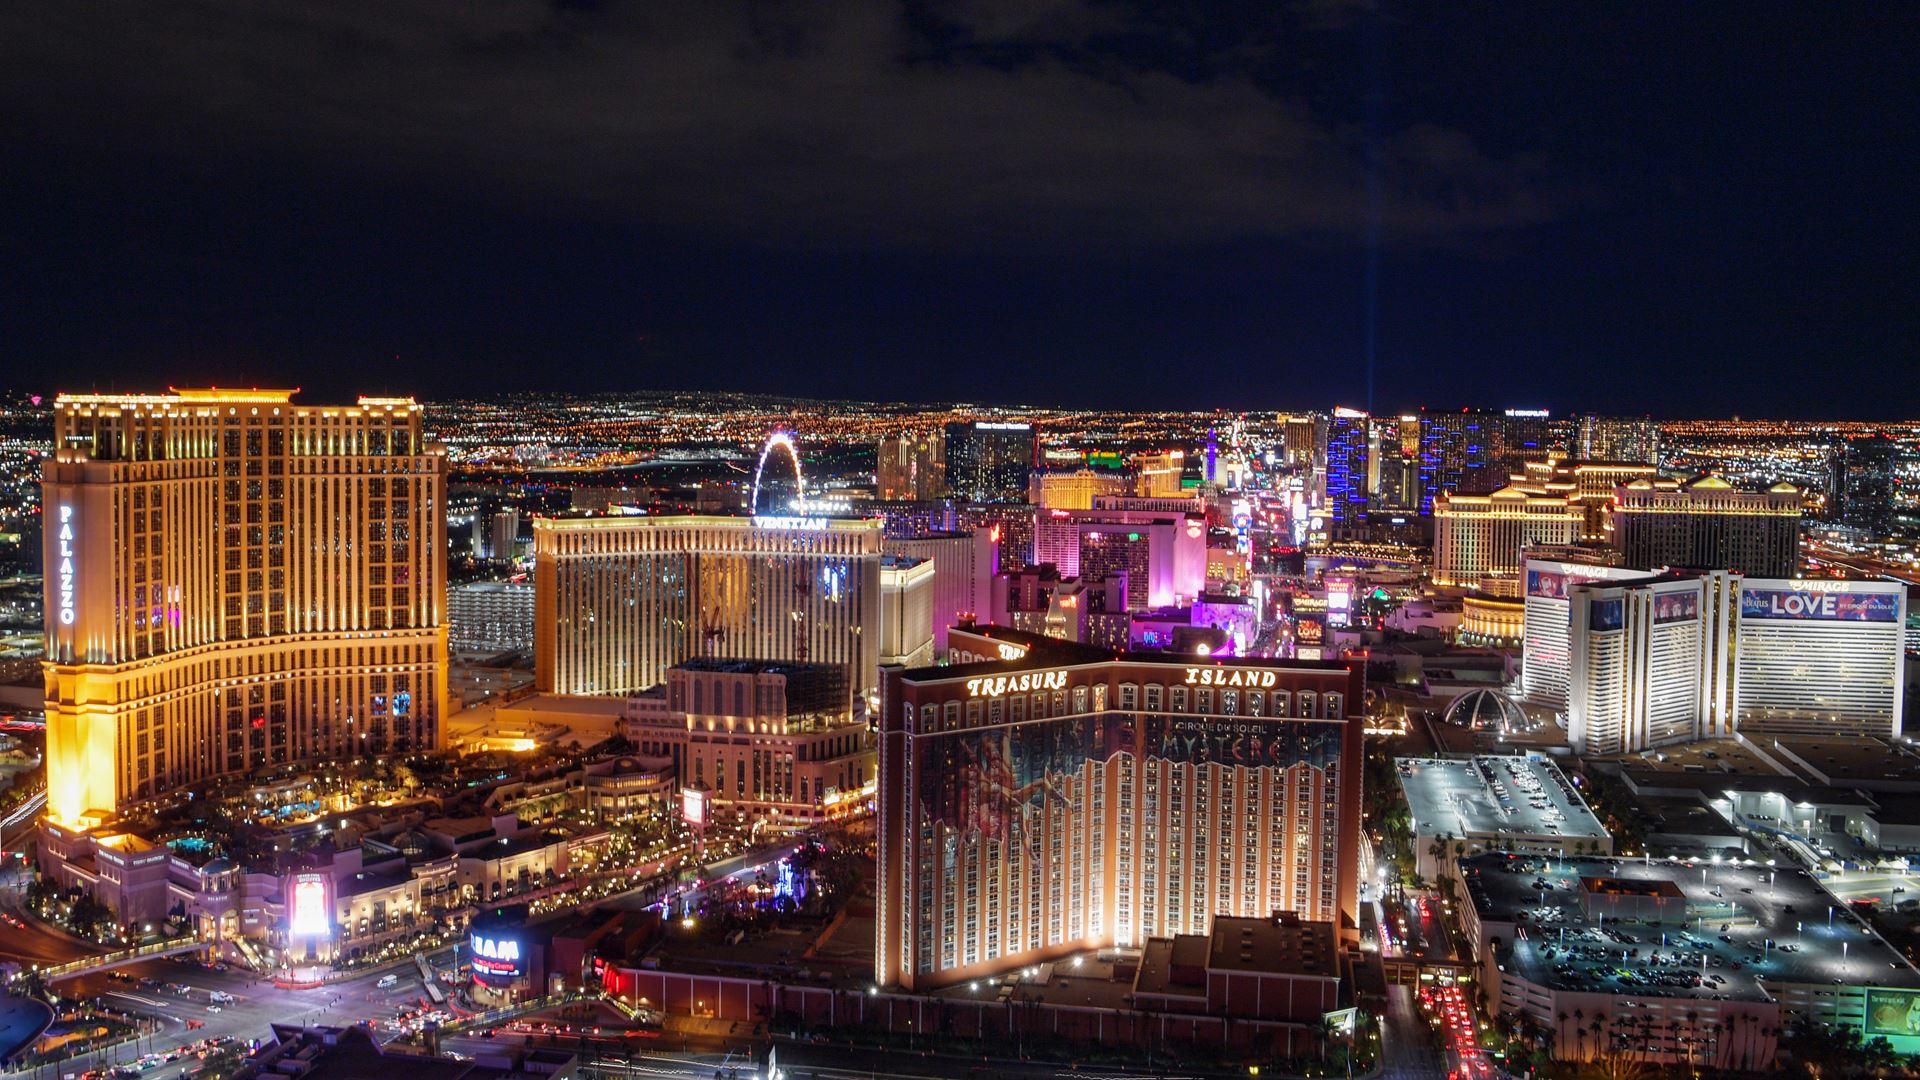 The Las Vegas F1 Grand Prix will Officially Be On a Saturday Night